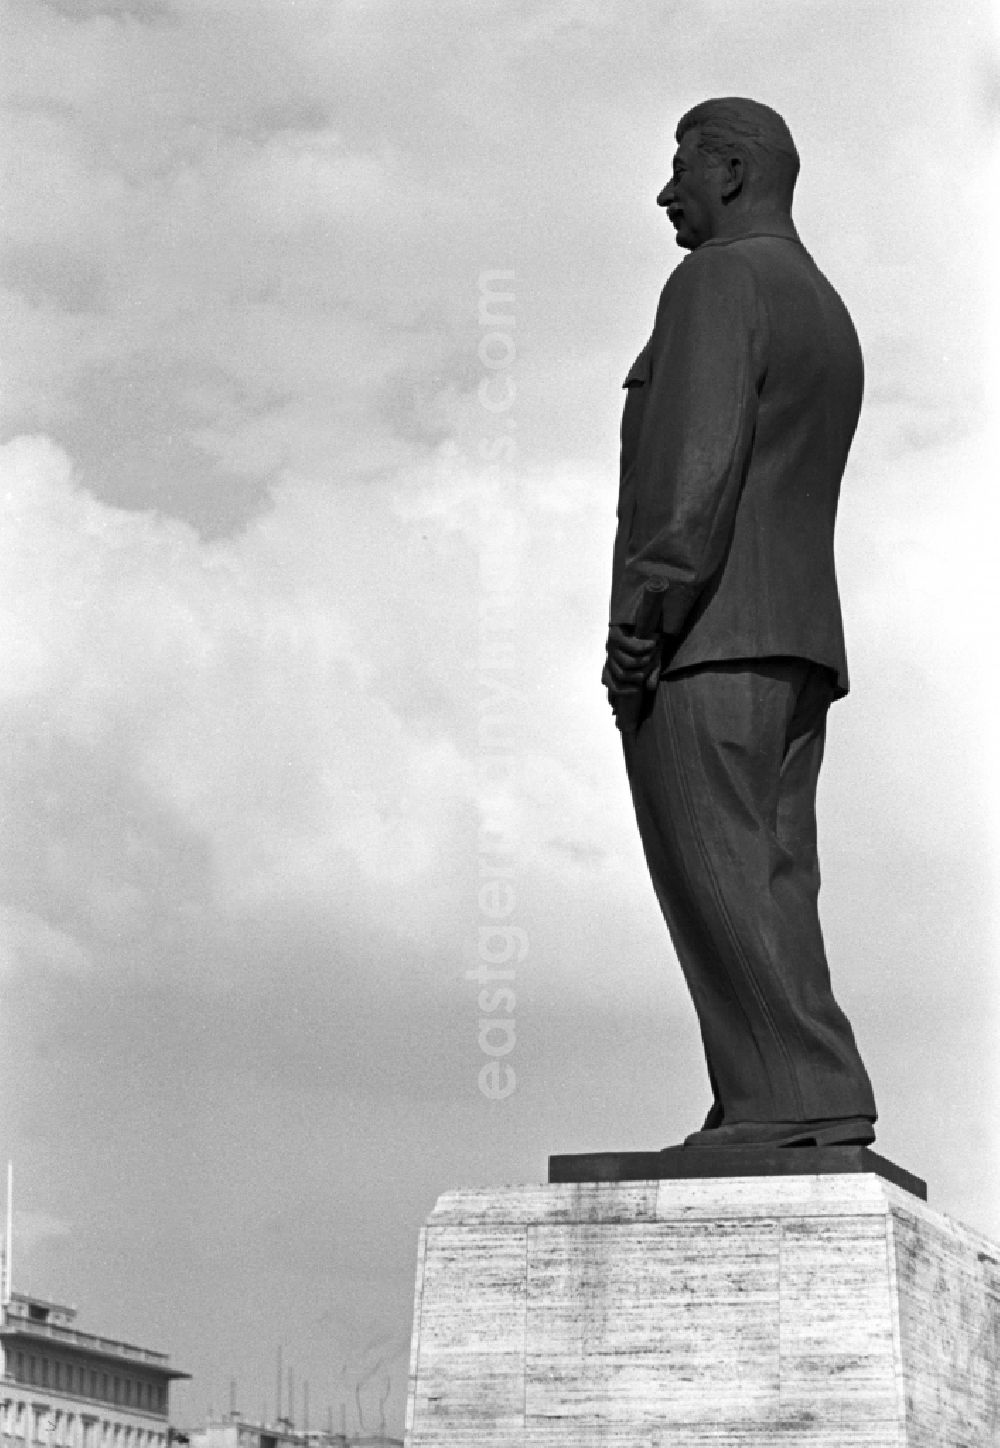 GDR picture archive: Berlin - The bronze Stalin monument of the Soviet dictator Josef Stalin stood in the Stalinallee (now Karl-Marx-Allee) named after him between Andreasstrasse and Koppenstrasse opposite the German Sports Hall in the Friedrichshain district of East Berlin in the territory of the former GDR, German Democratic Republic